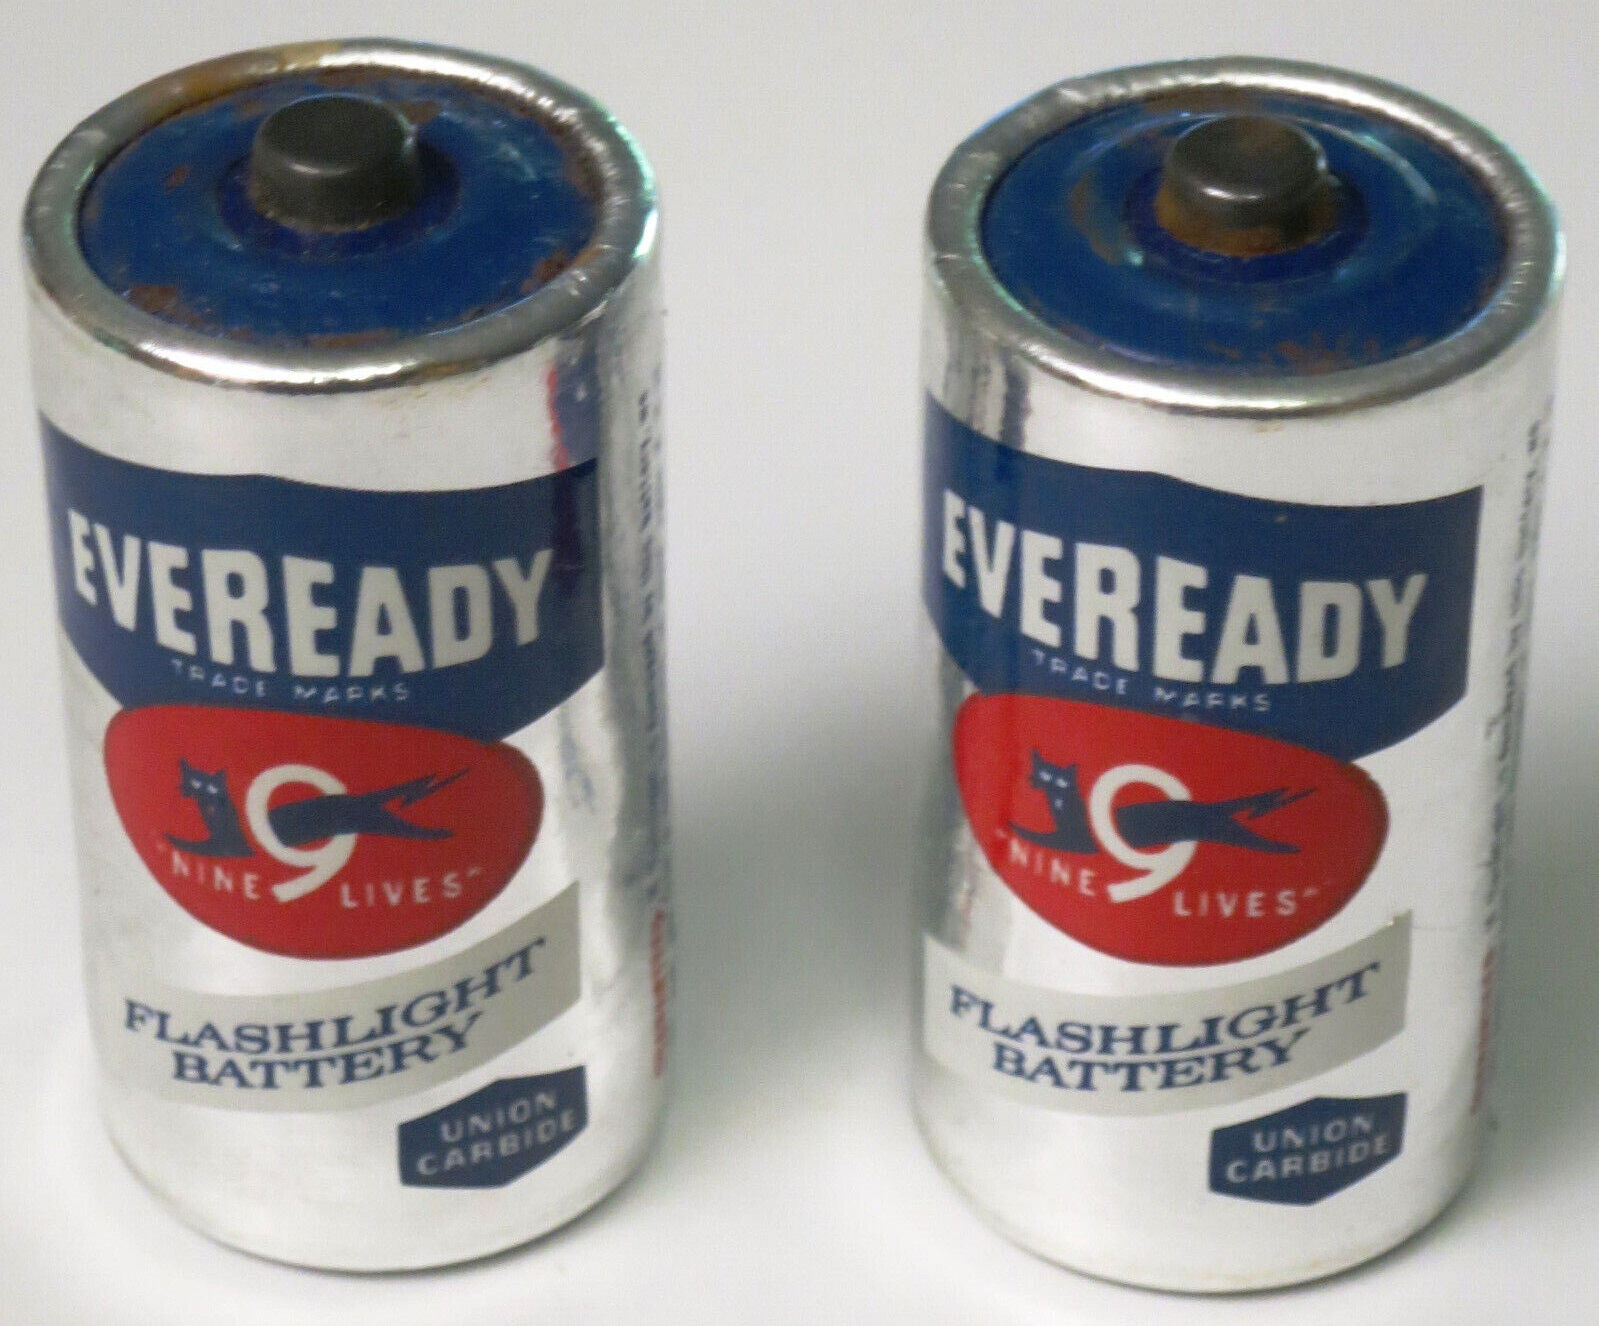 EVEREADY C-Cell Batteries Black Cat NINE 9 LIVES No 935 Silver Paper VINTAGE Two